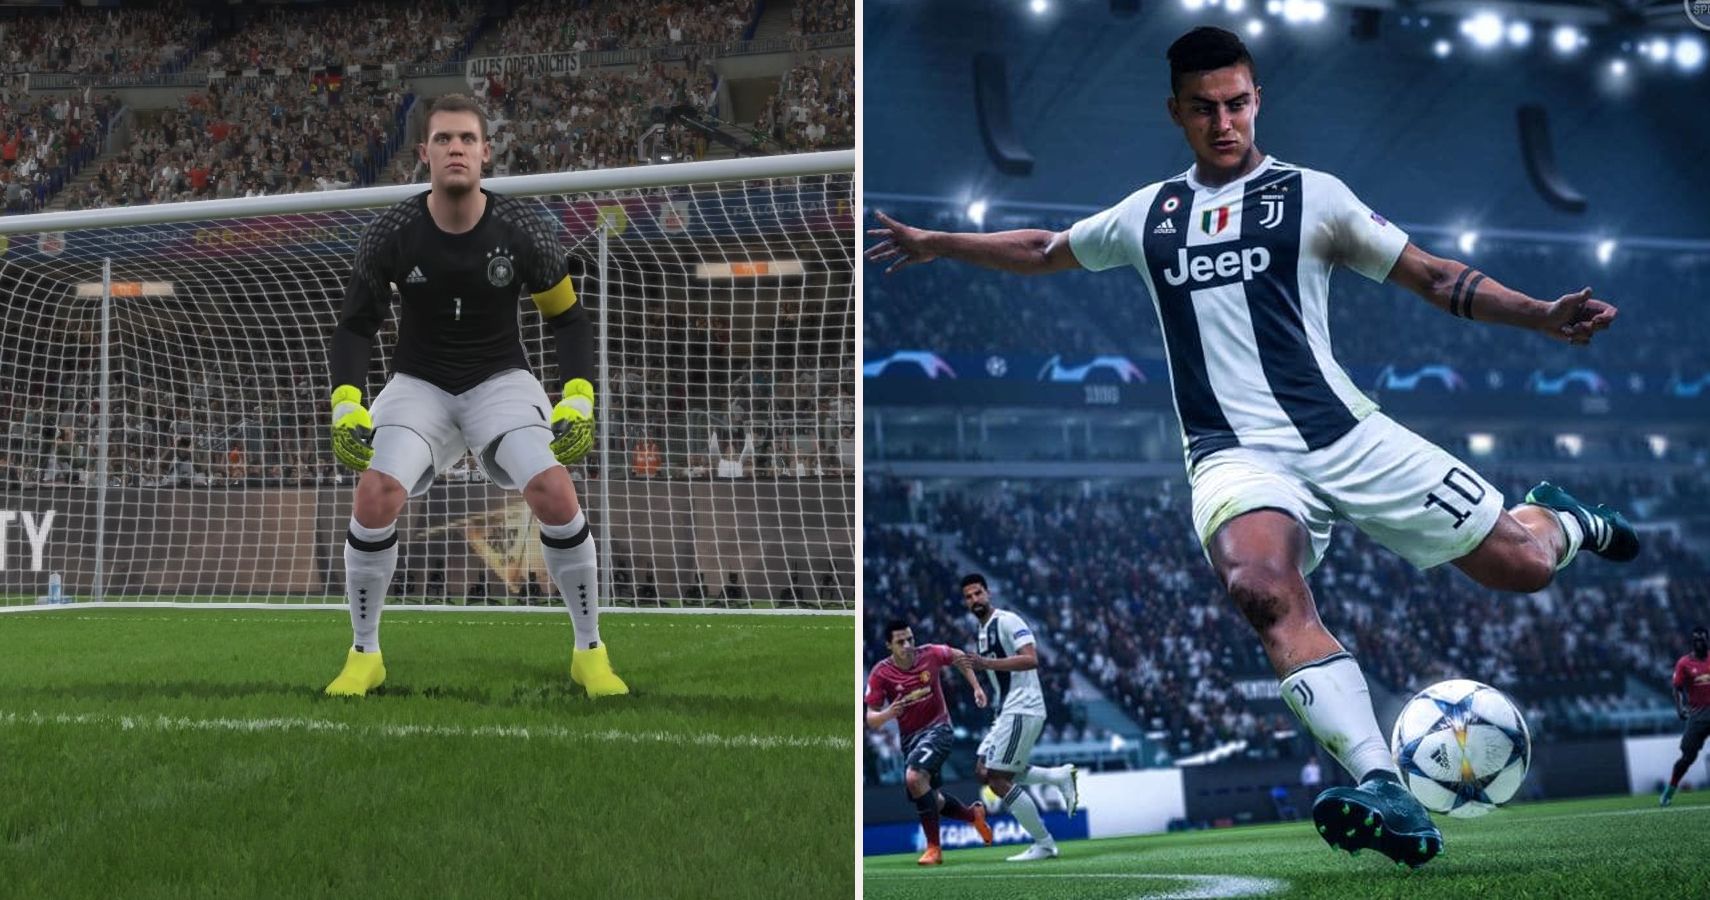 Which is the best soccer game of all time and why is it the best?